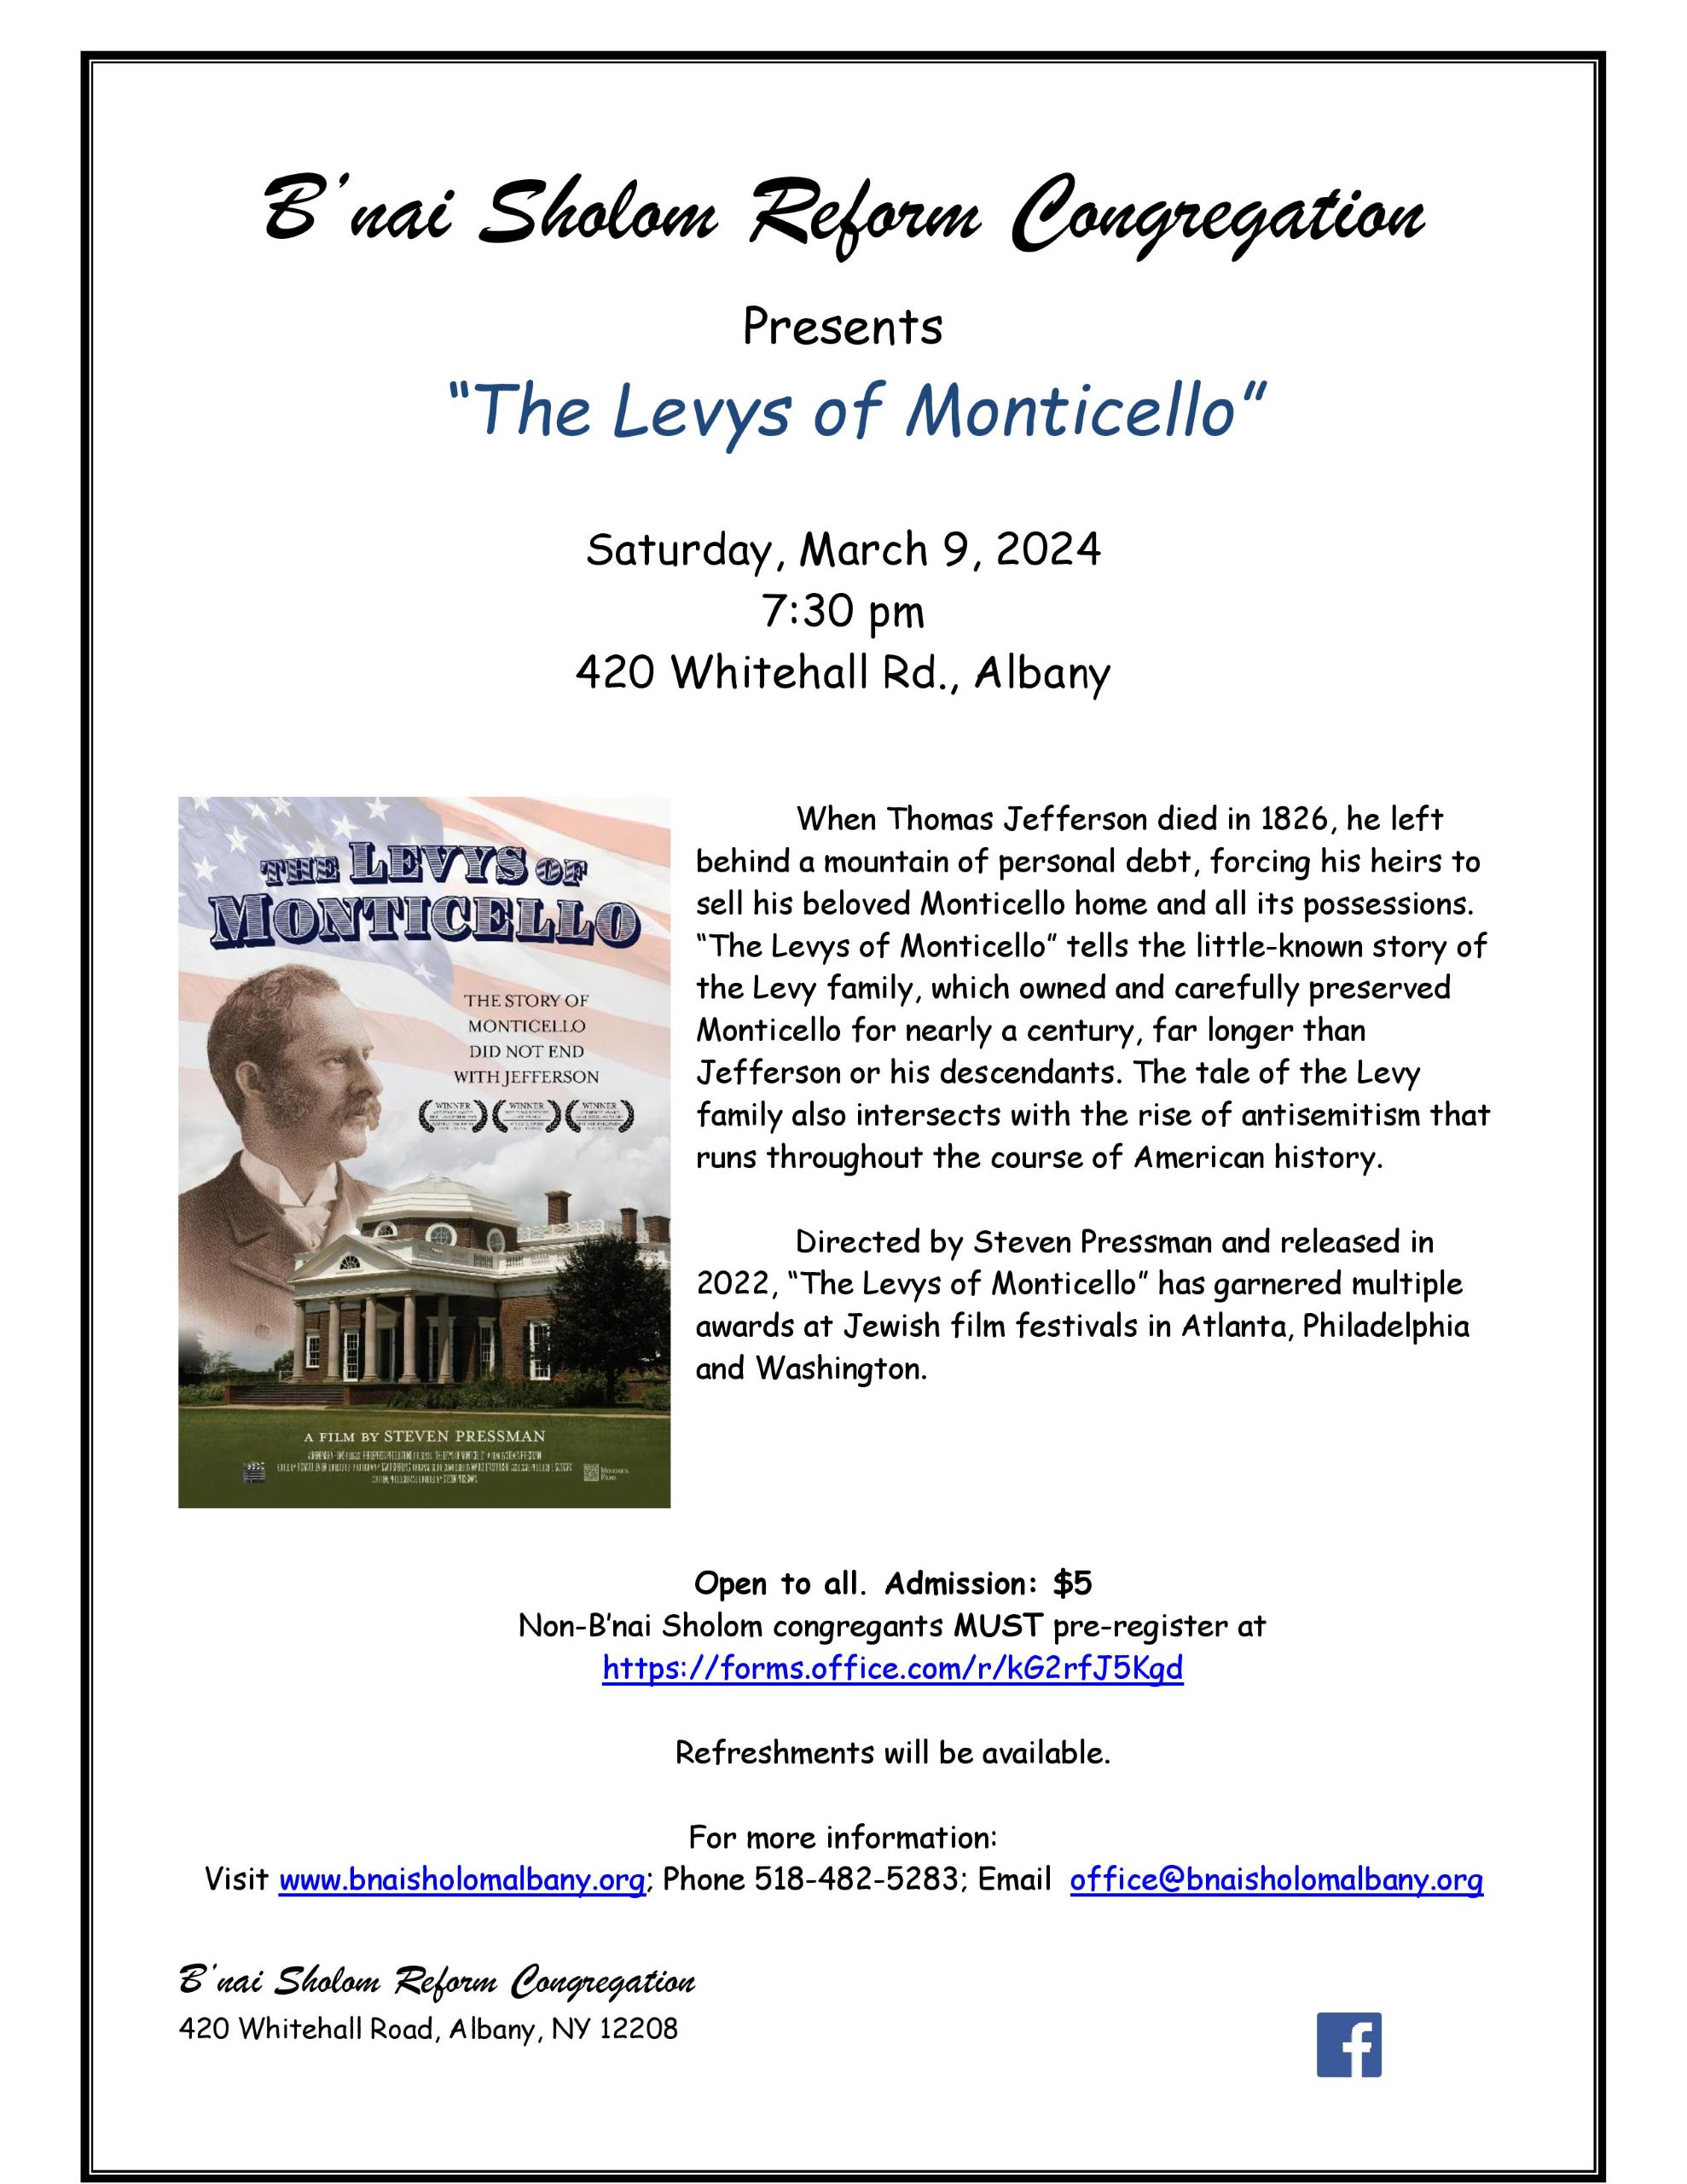 Movie Night - "The Levys of Monticello"